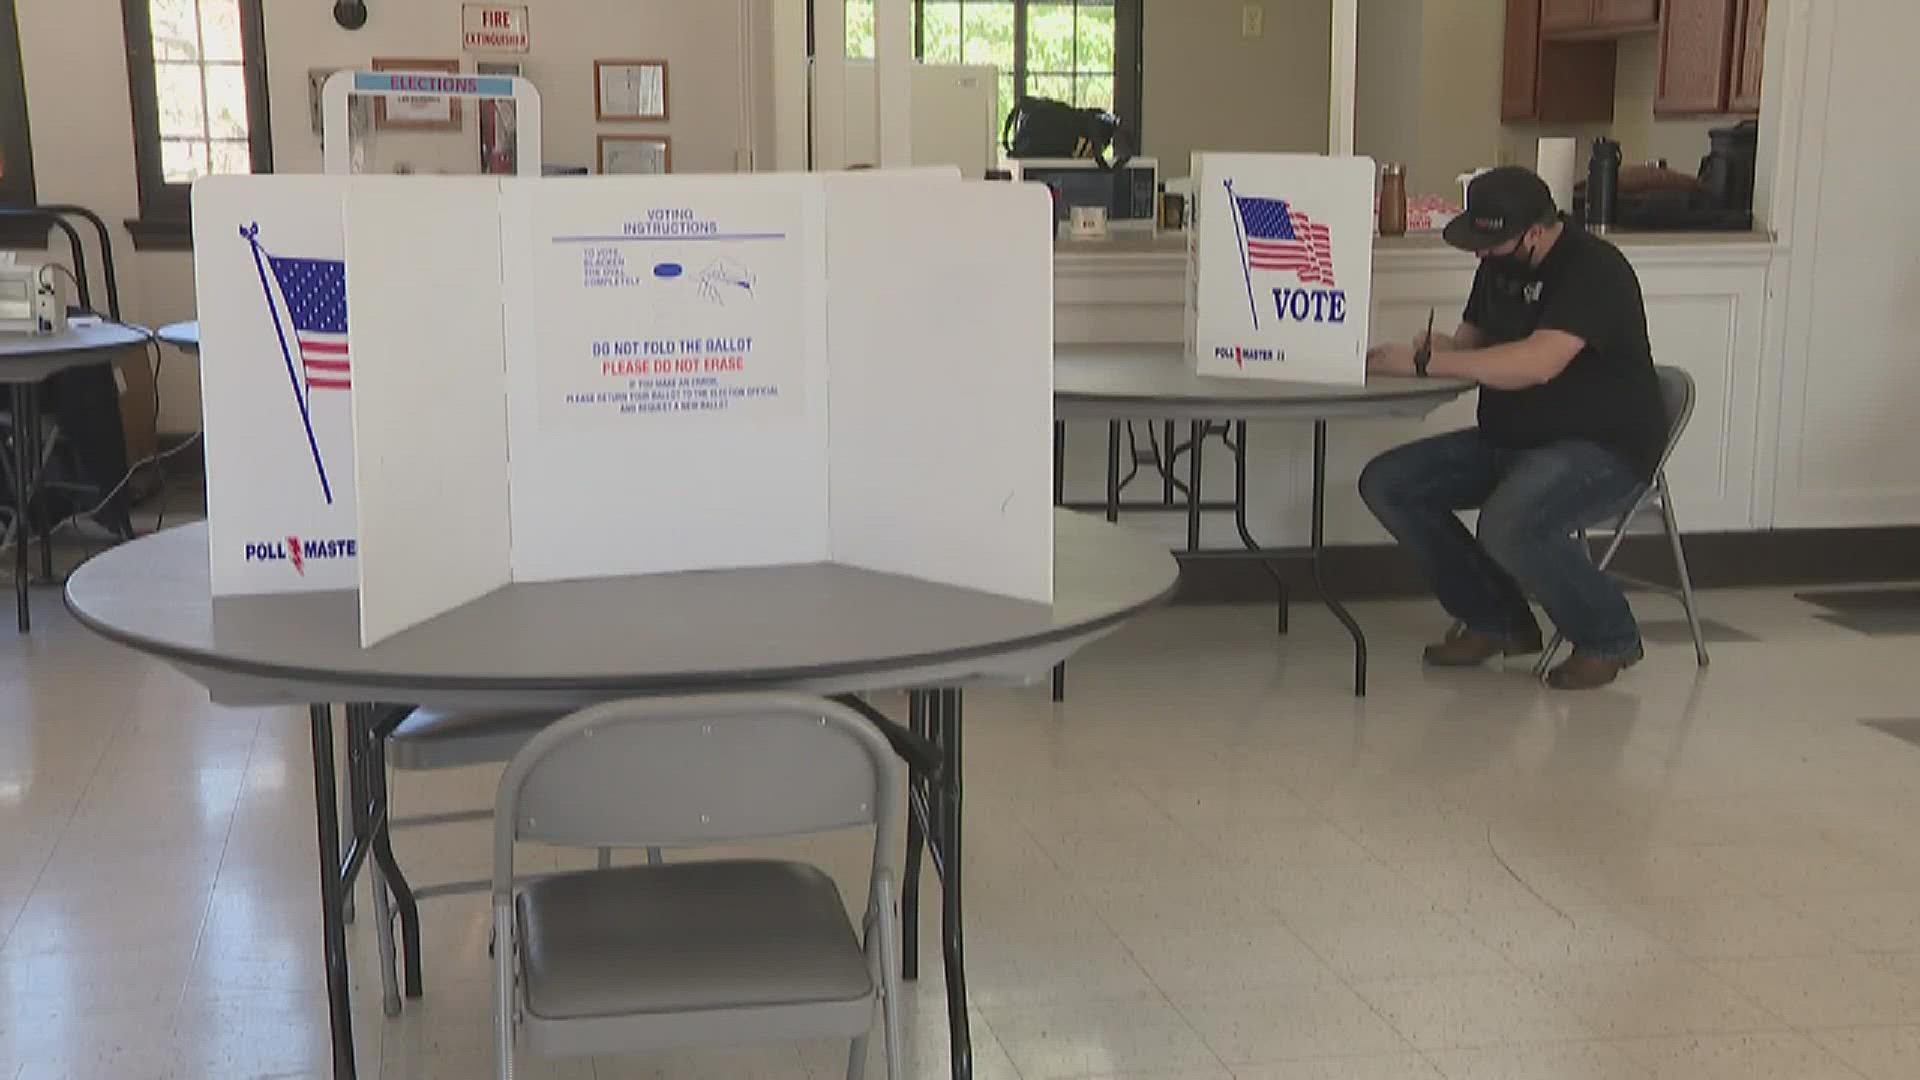 The group says the State of Iowa has failed to provide non-English election materials to voters with limited English proficiency.